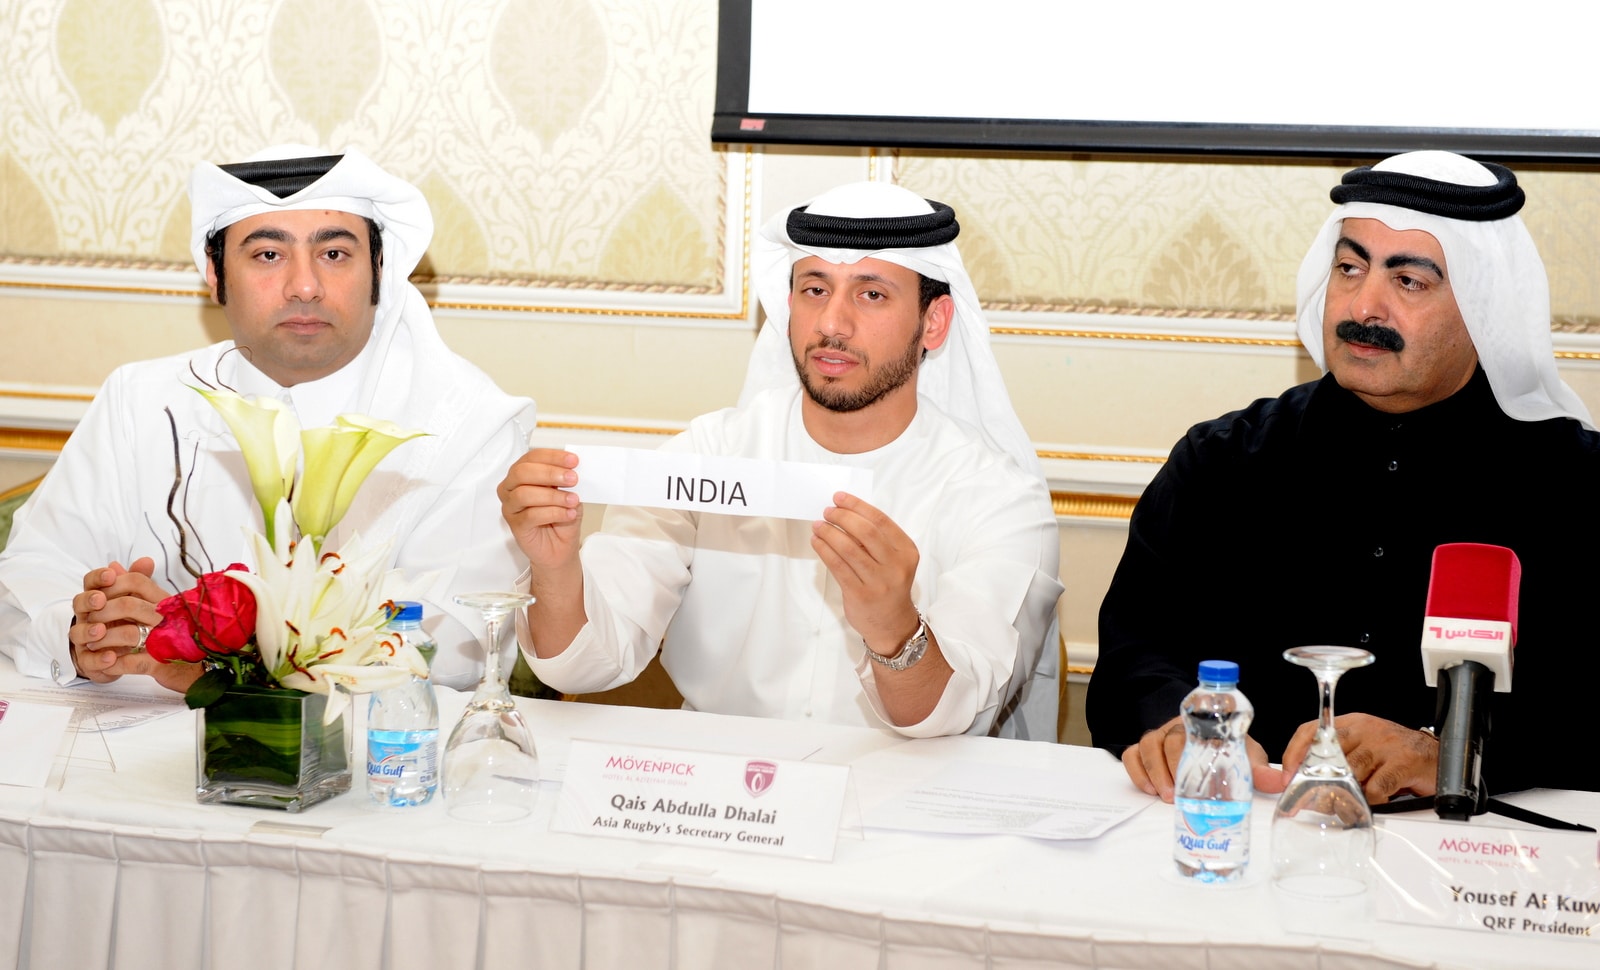 Asia Rugby’s Secretary General, Qais Abdulla Dhalai joins QRF President, Yousef Al Kuwari in presiding over today’s official draw for the Asia Rugby Sevens Trophy 2017 – Doha.